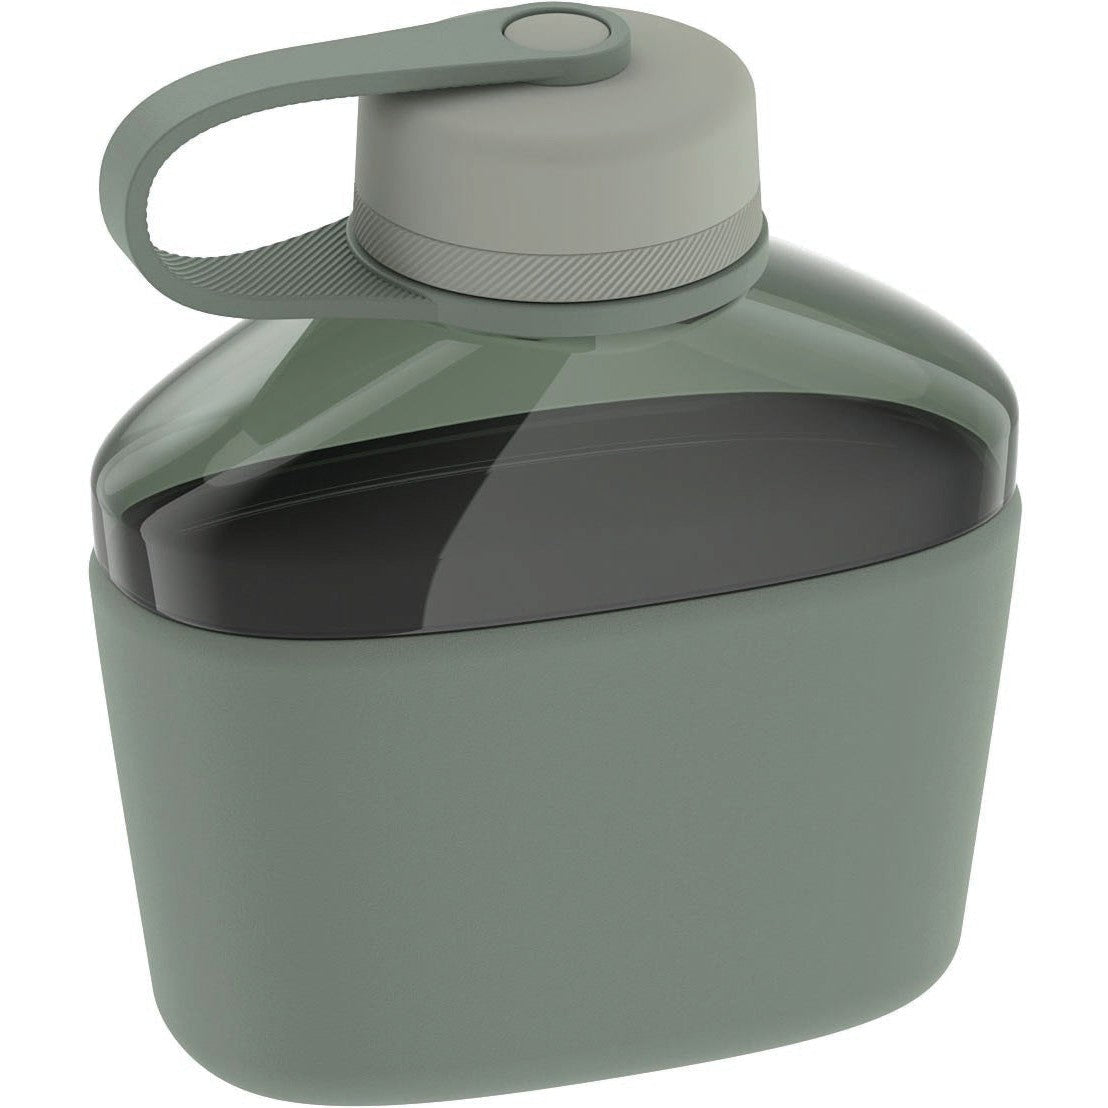 40 oz. Hydration Bottle with screw-off cap – Shop Green Canteen